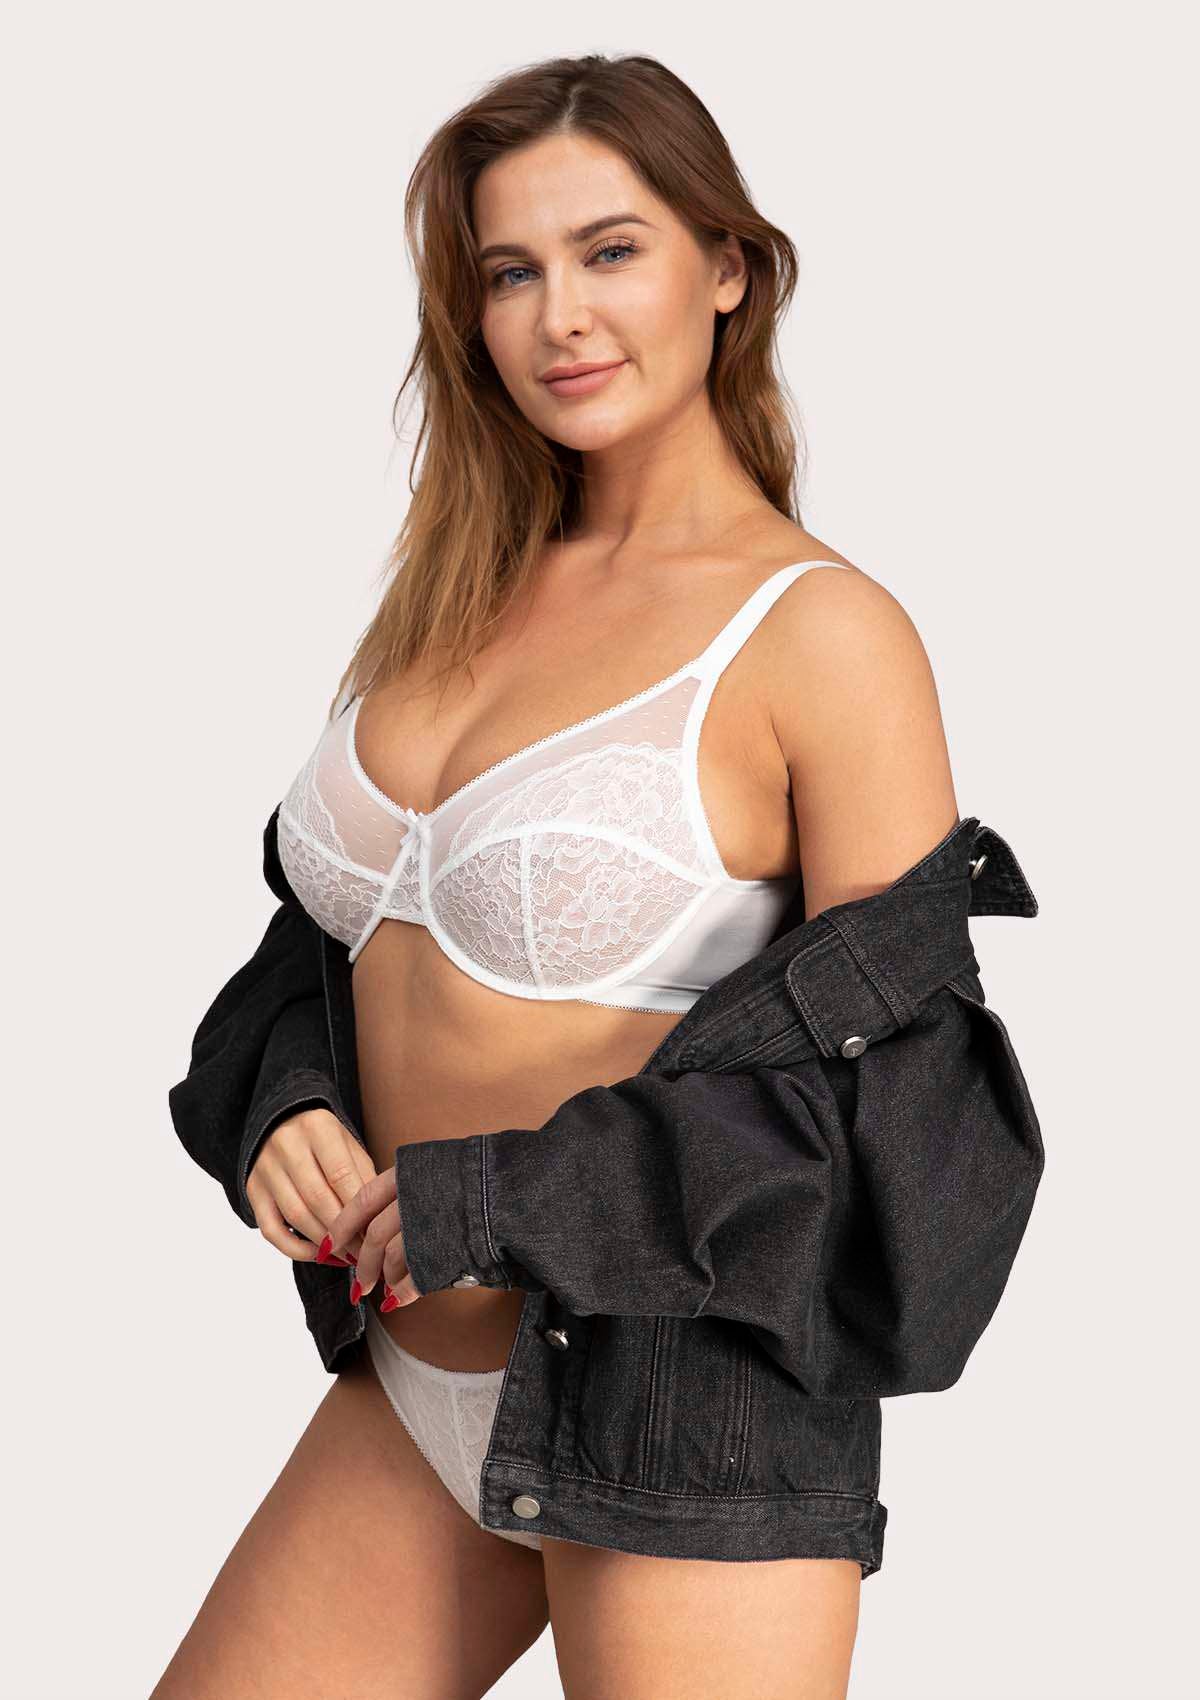 HSIA Enchante Lace Bra And Panties Set: Bra For Side And Back Fat - White / 38 / G